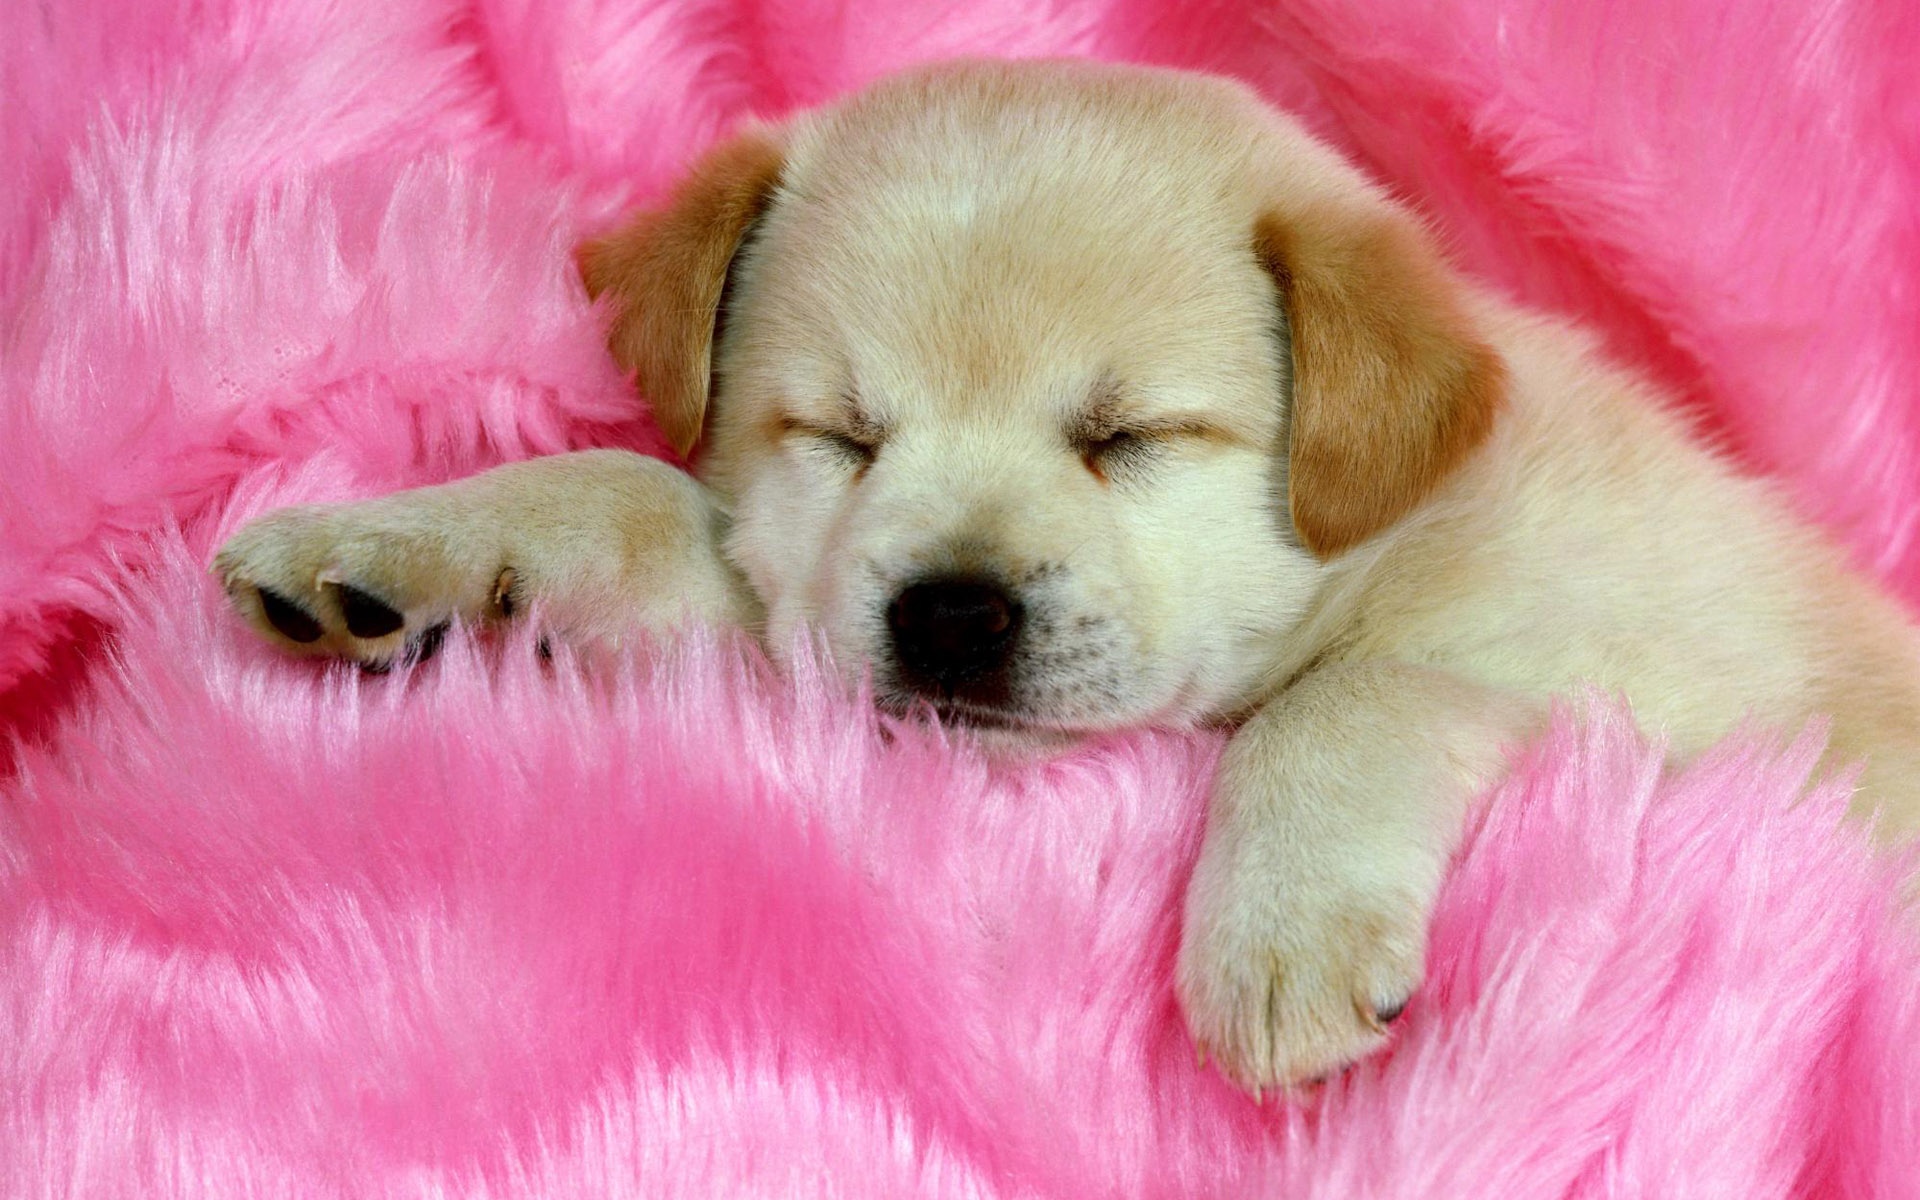 Puppy sleeping on a pink rug by Scott Ford